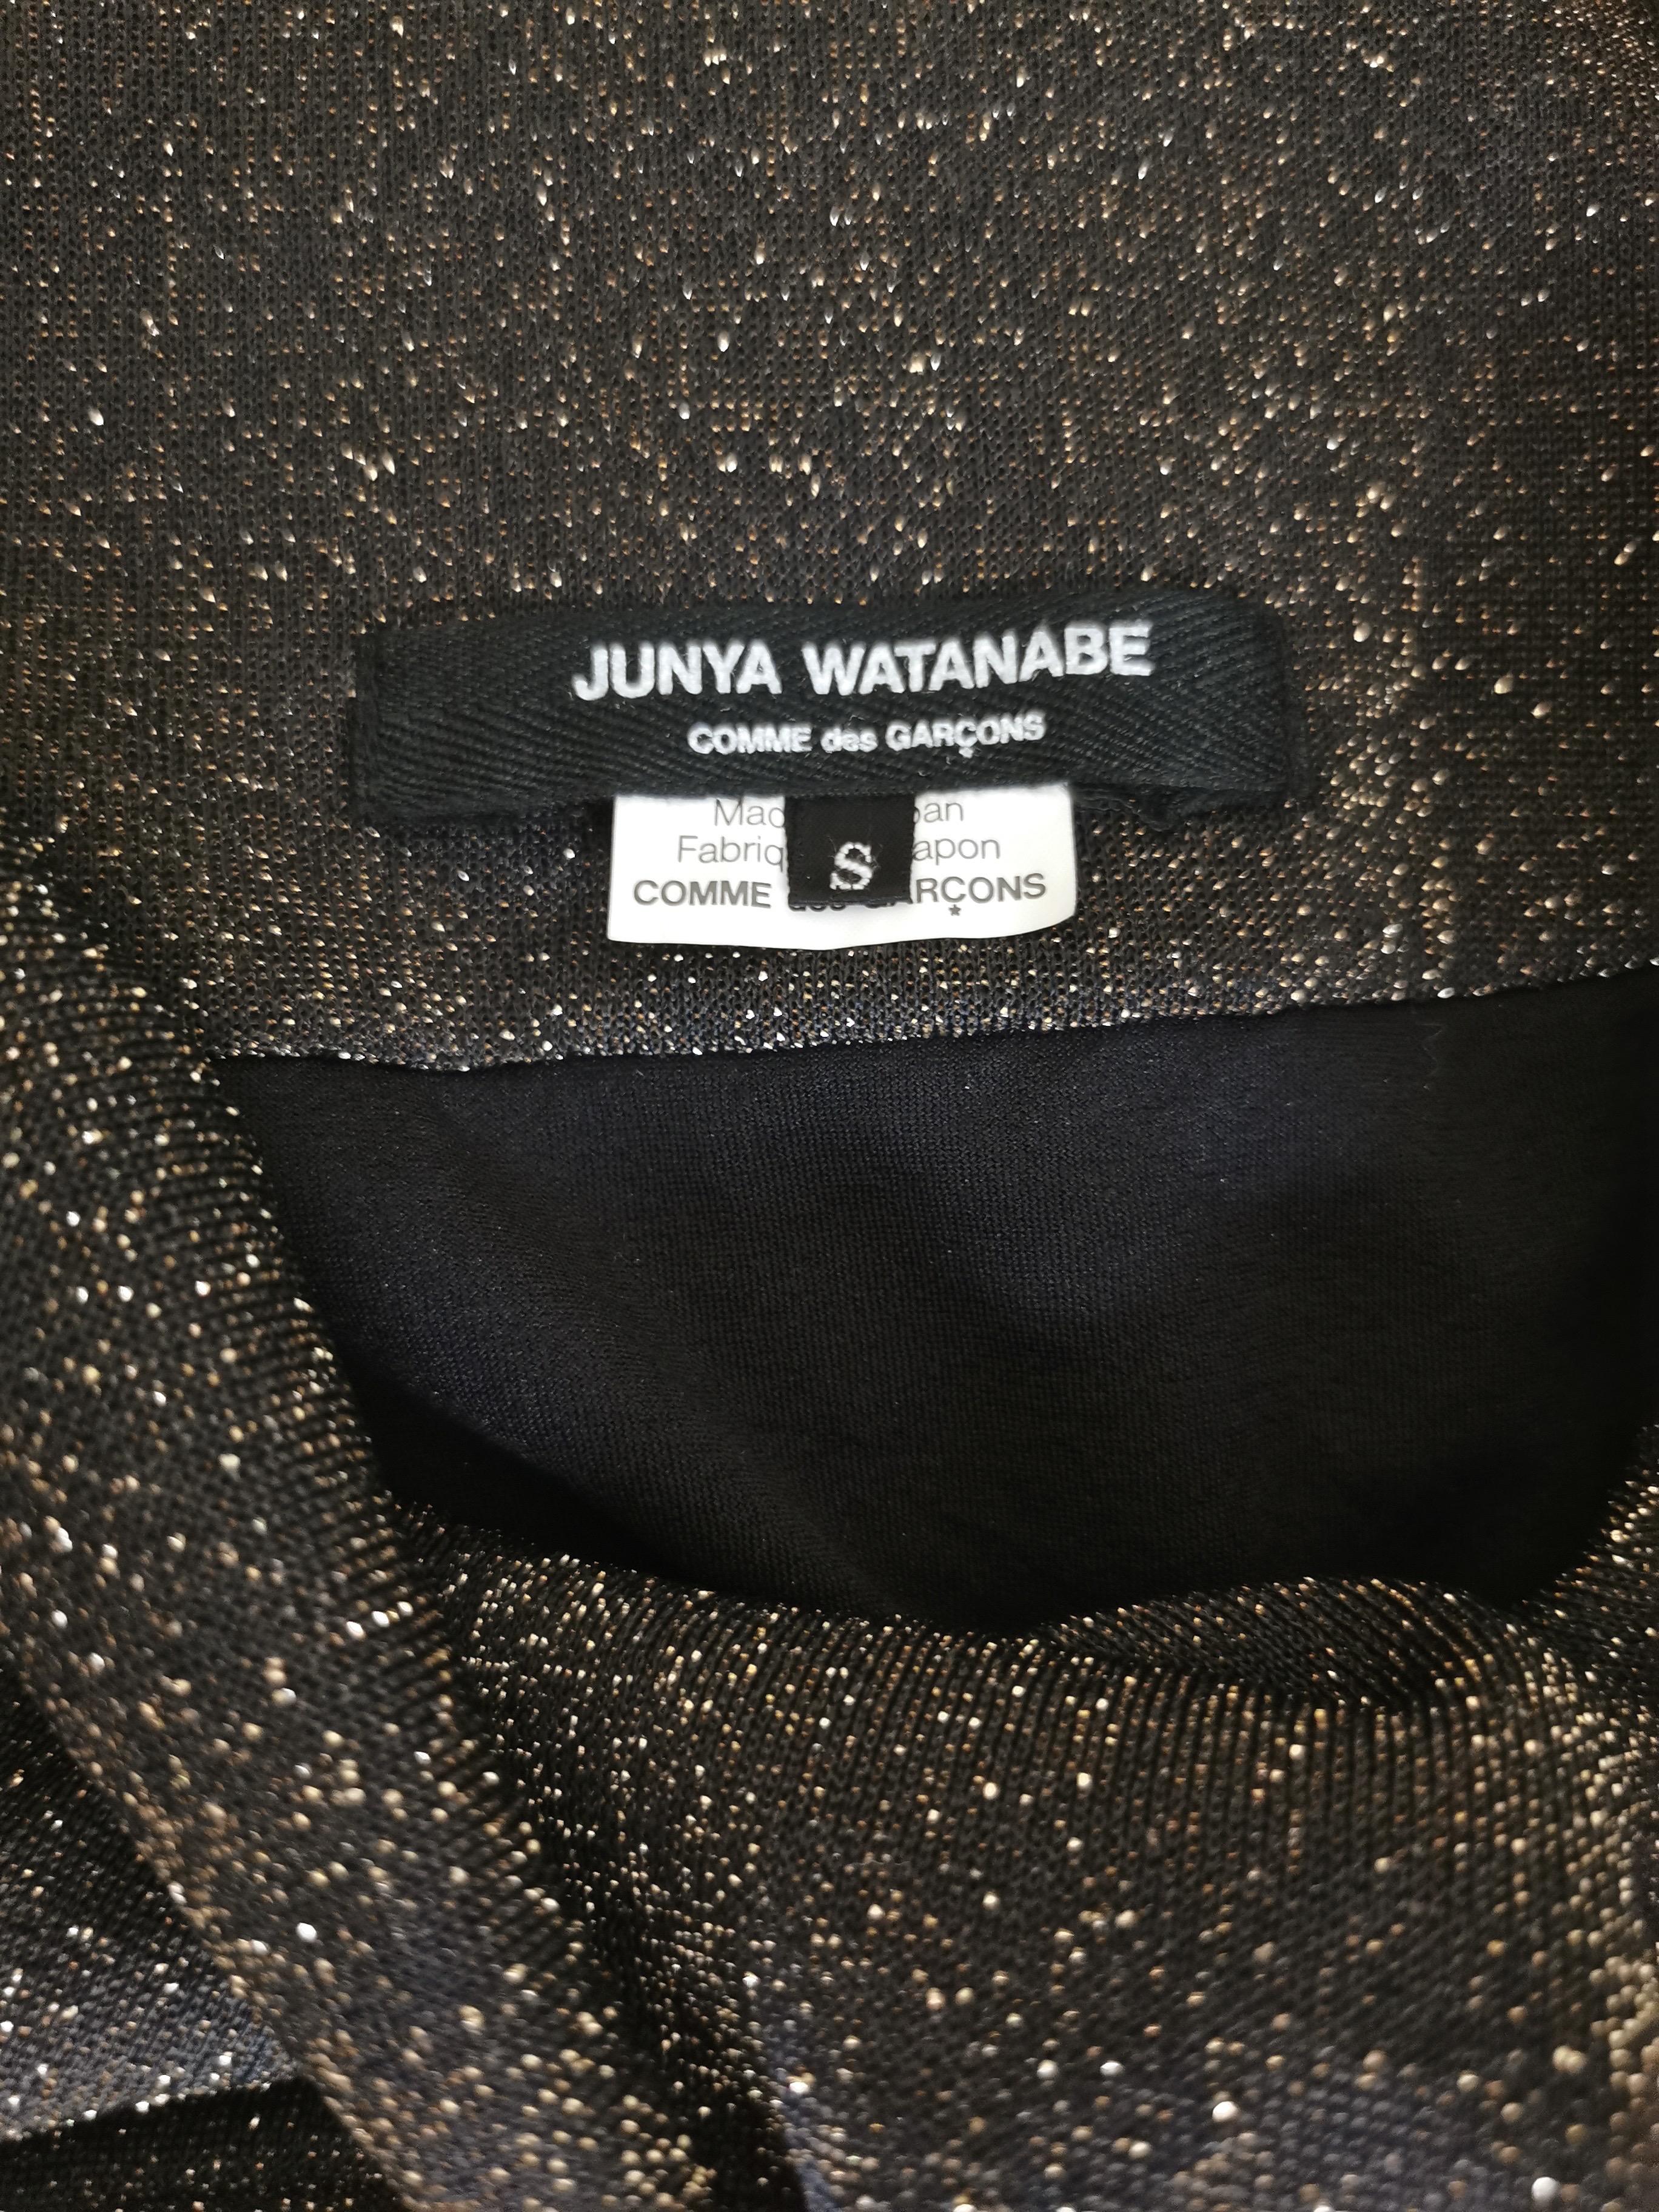 Junya Watanabe Comme des Garcons Lurex Cocoon Top with Extended Neck AD2008 For Sale 12